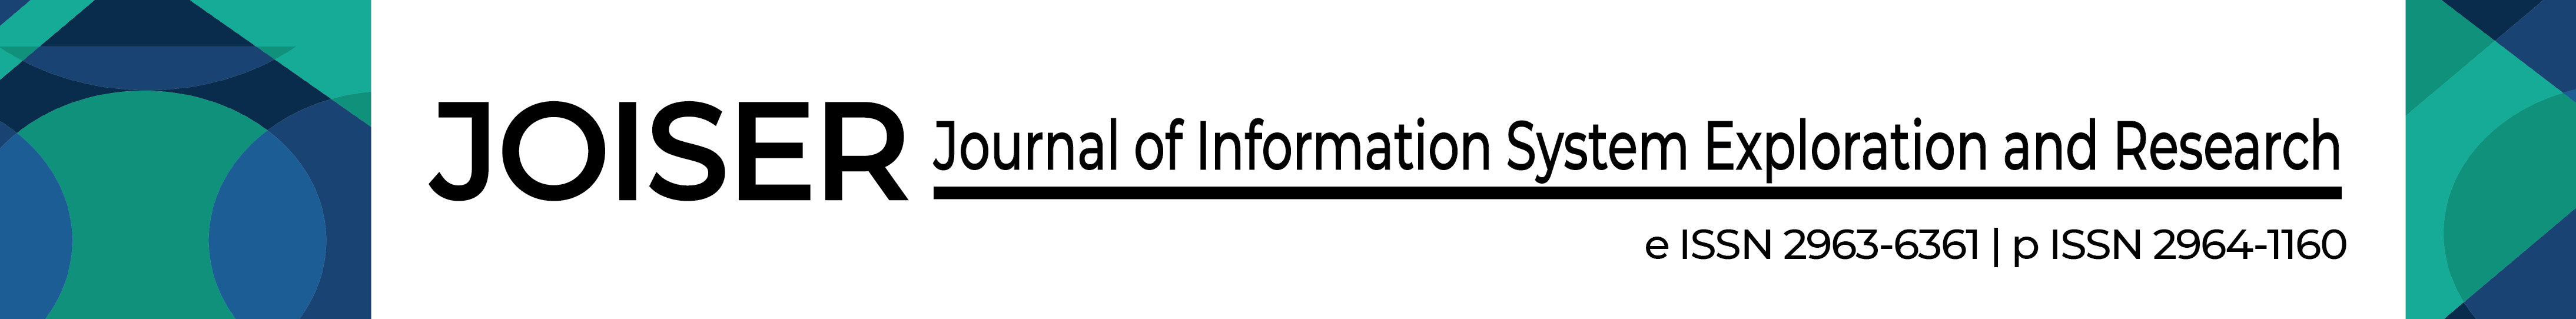 Joiser - Journal of Information System Exploration and Research